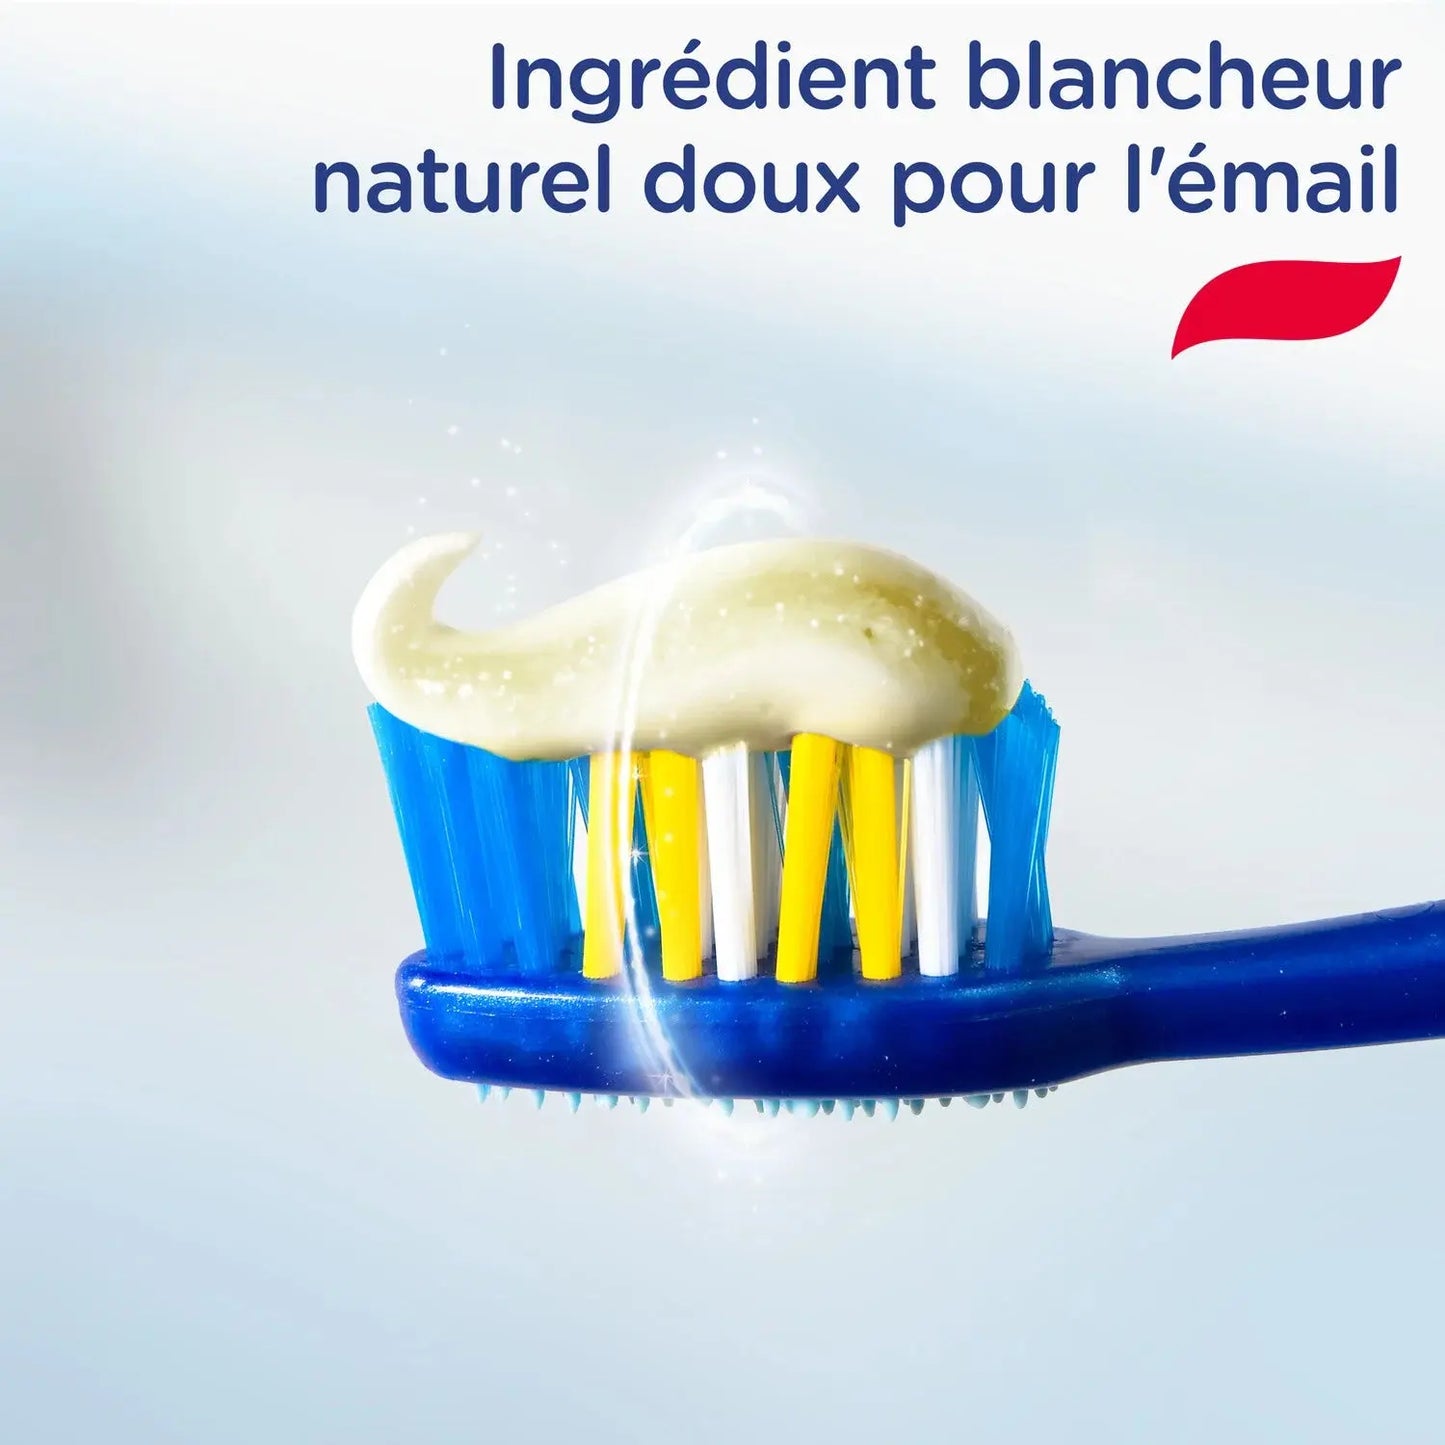 ntifrice Système Blancheur SIGNAL Dentifrice Système Blancheur  SIGNAL  Dentifrice Système Blancheur SIGNAL Signal